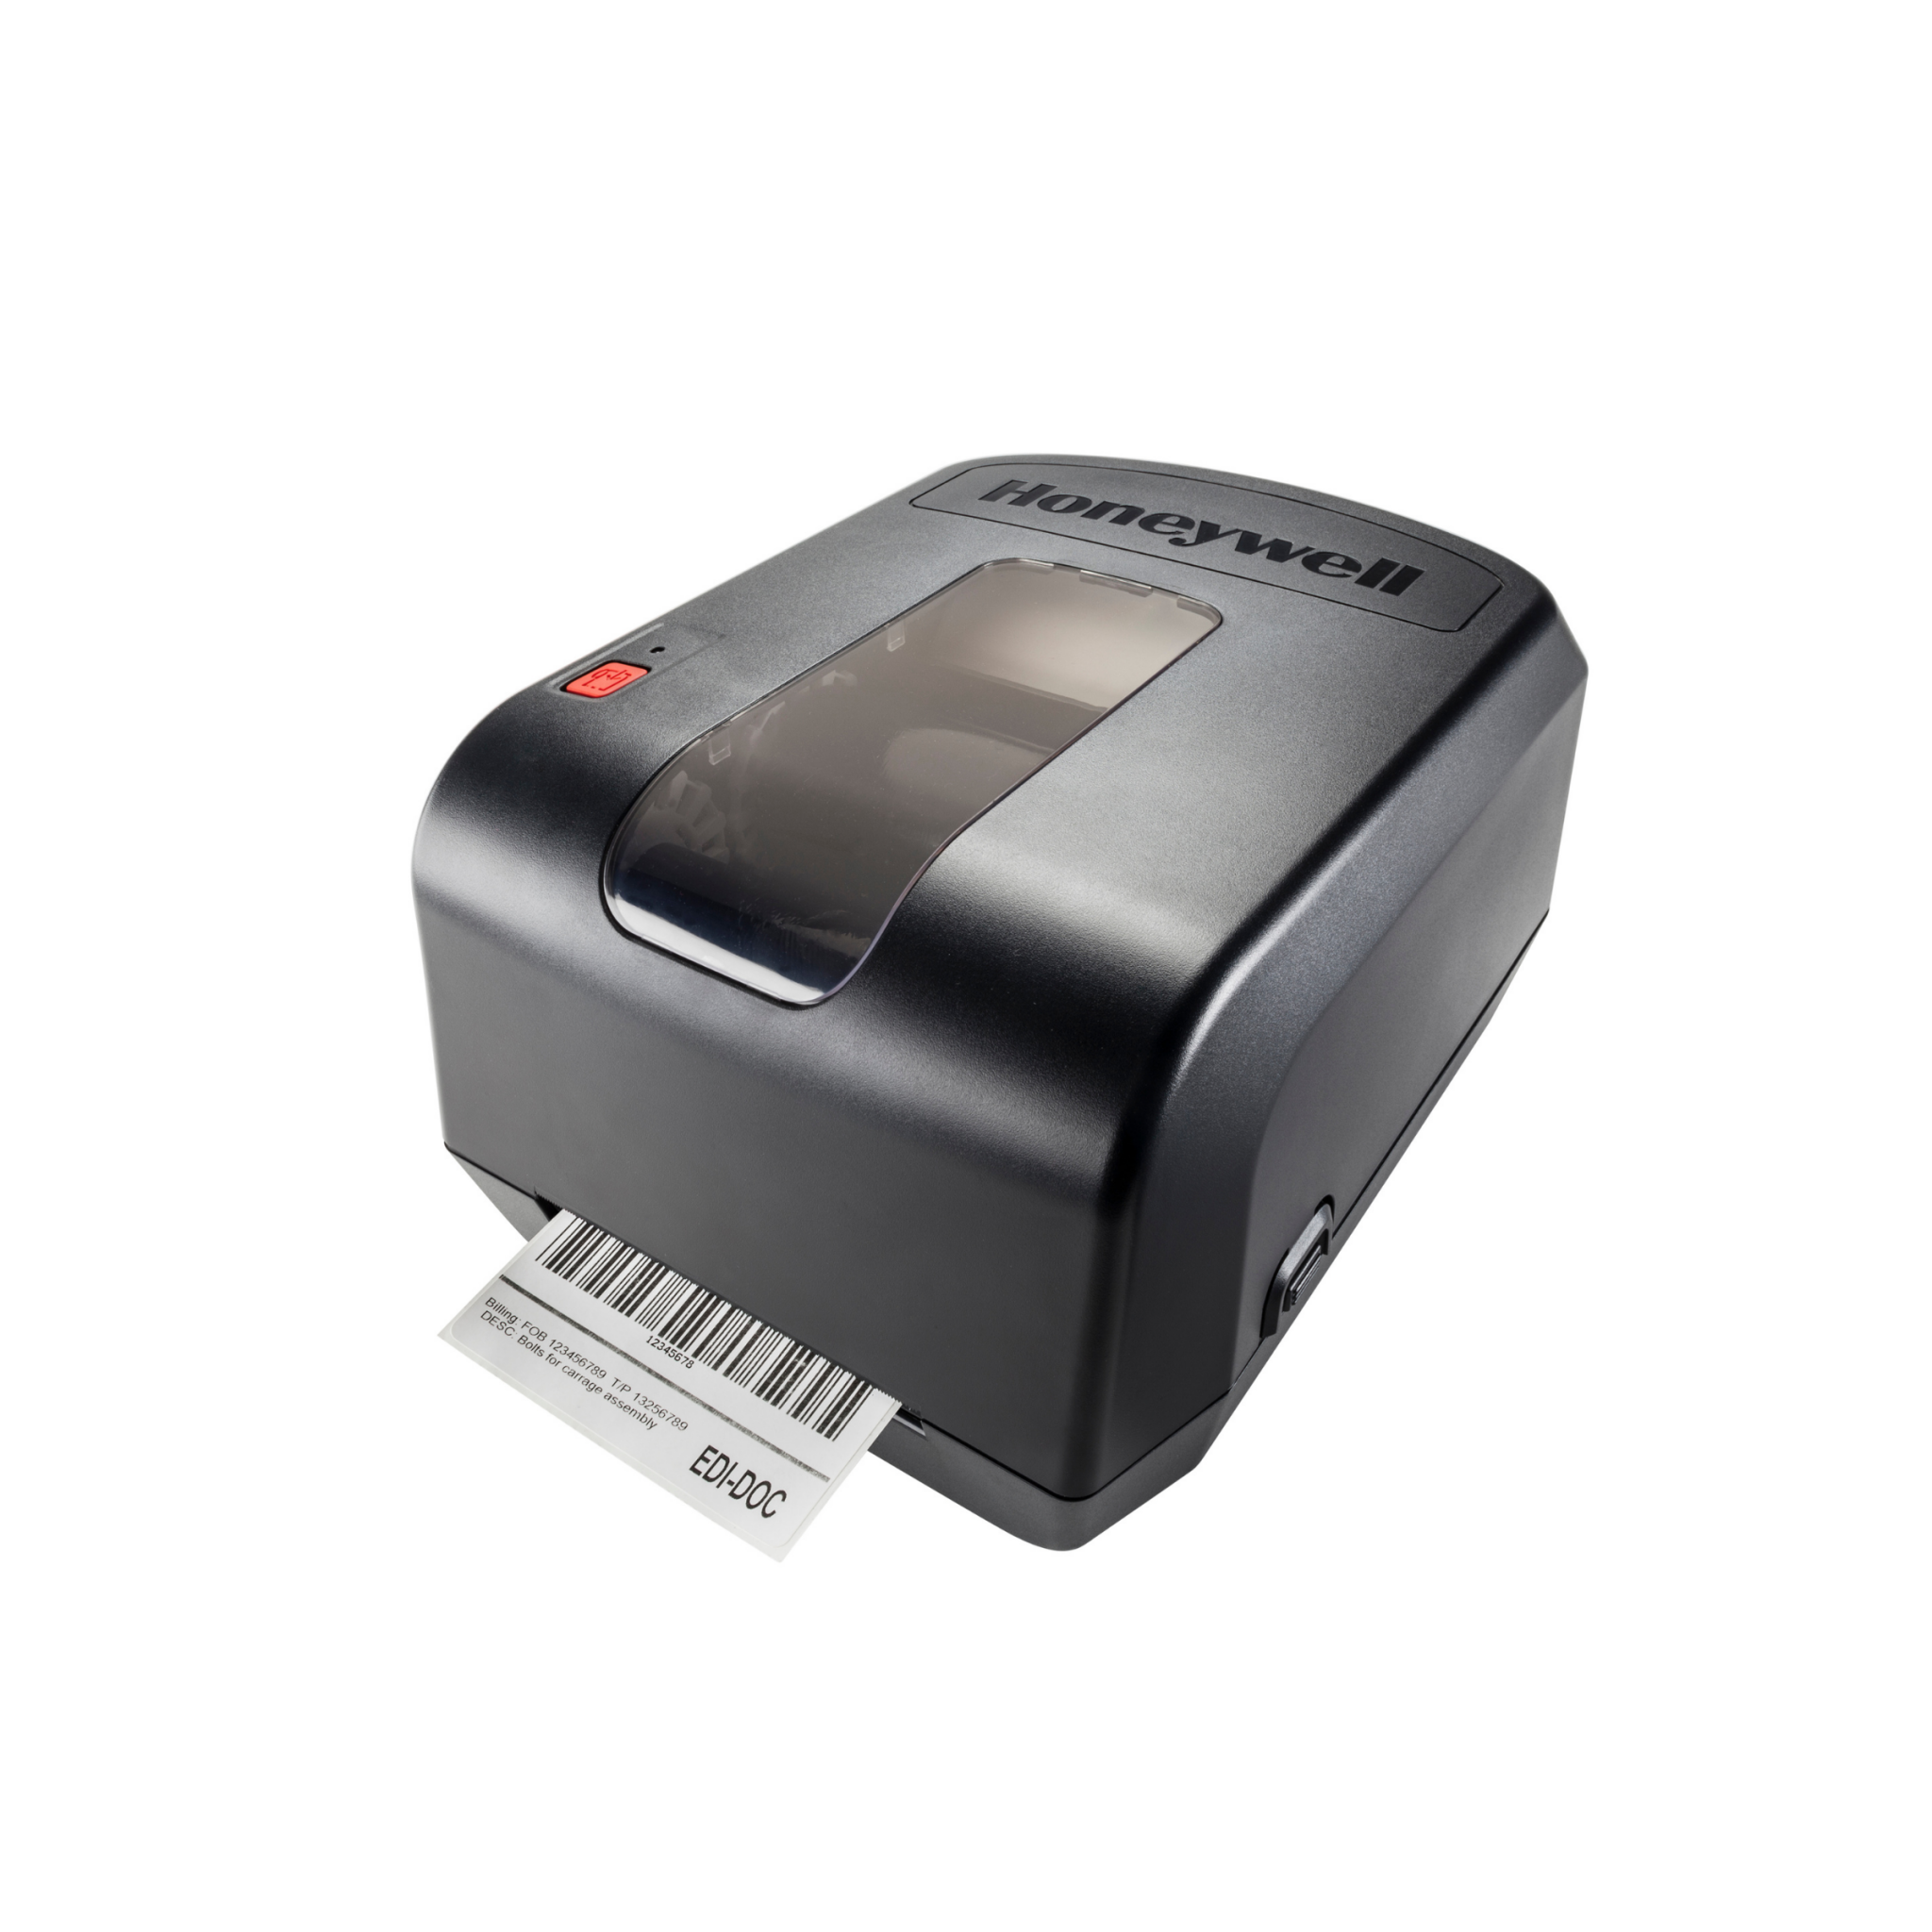 Stationary And Mobile Barcode Printers Rms Omega Technologies 7599